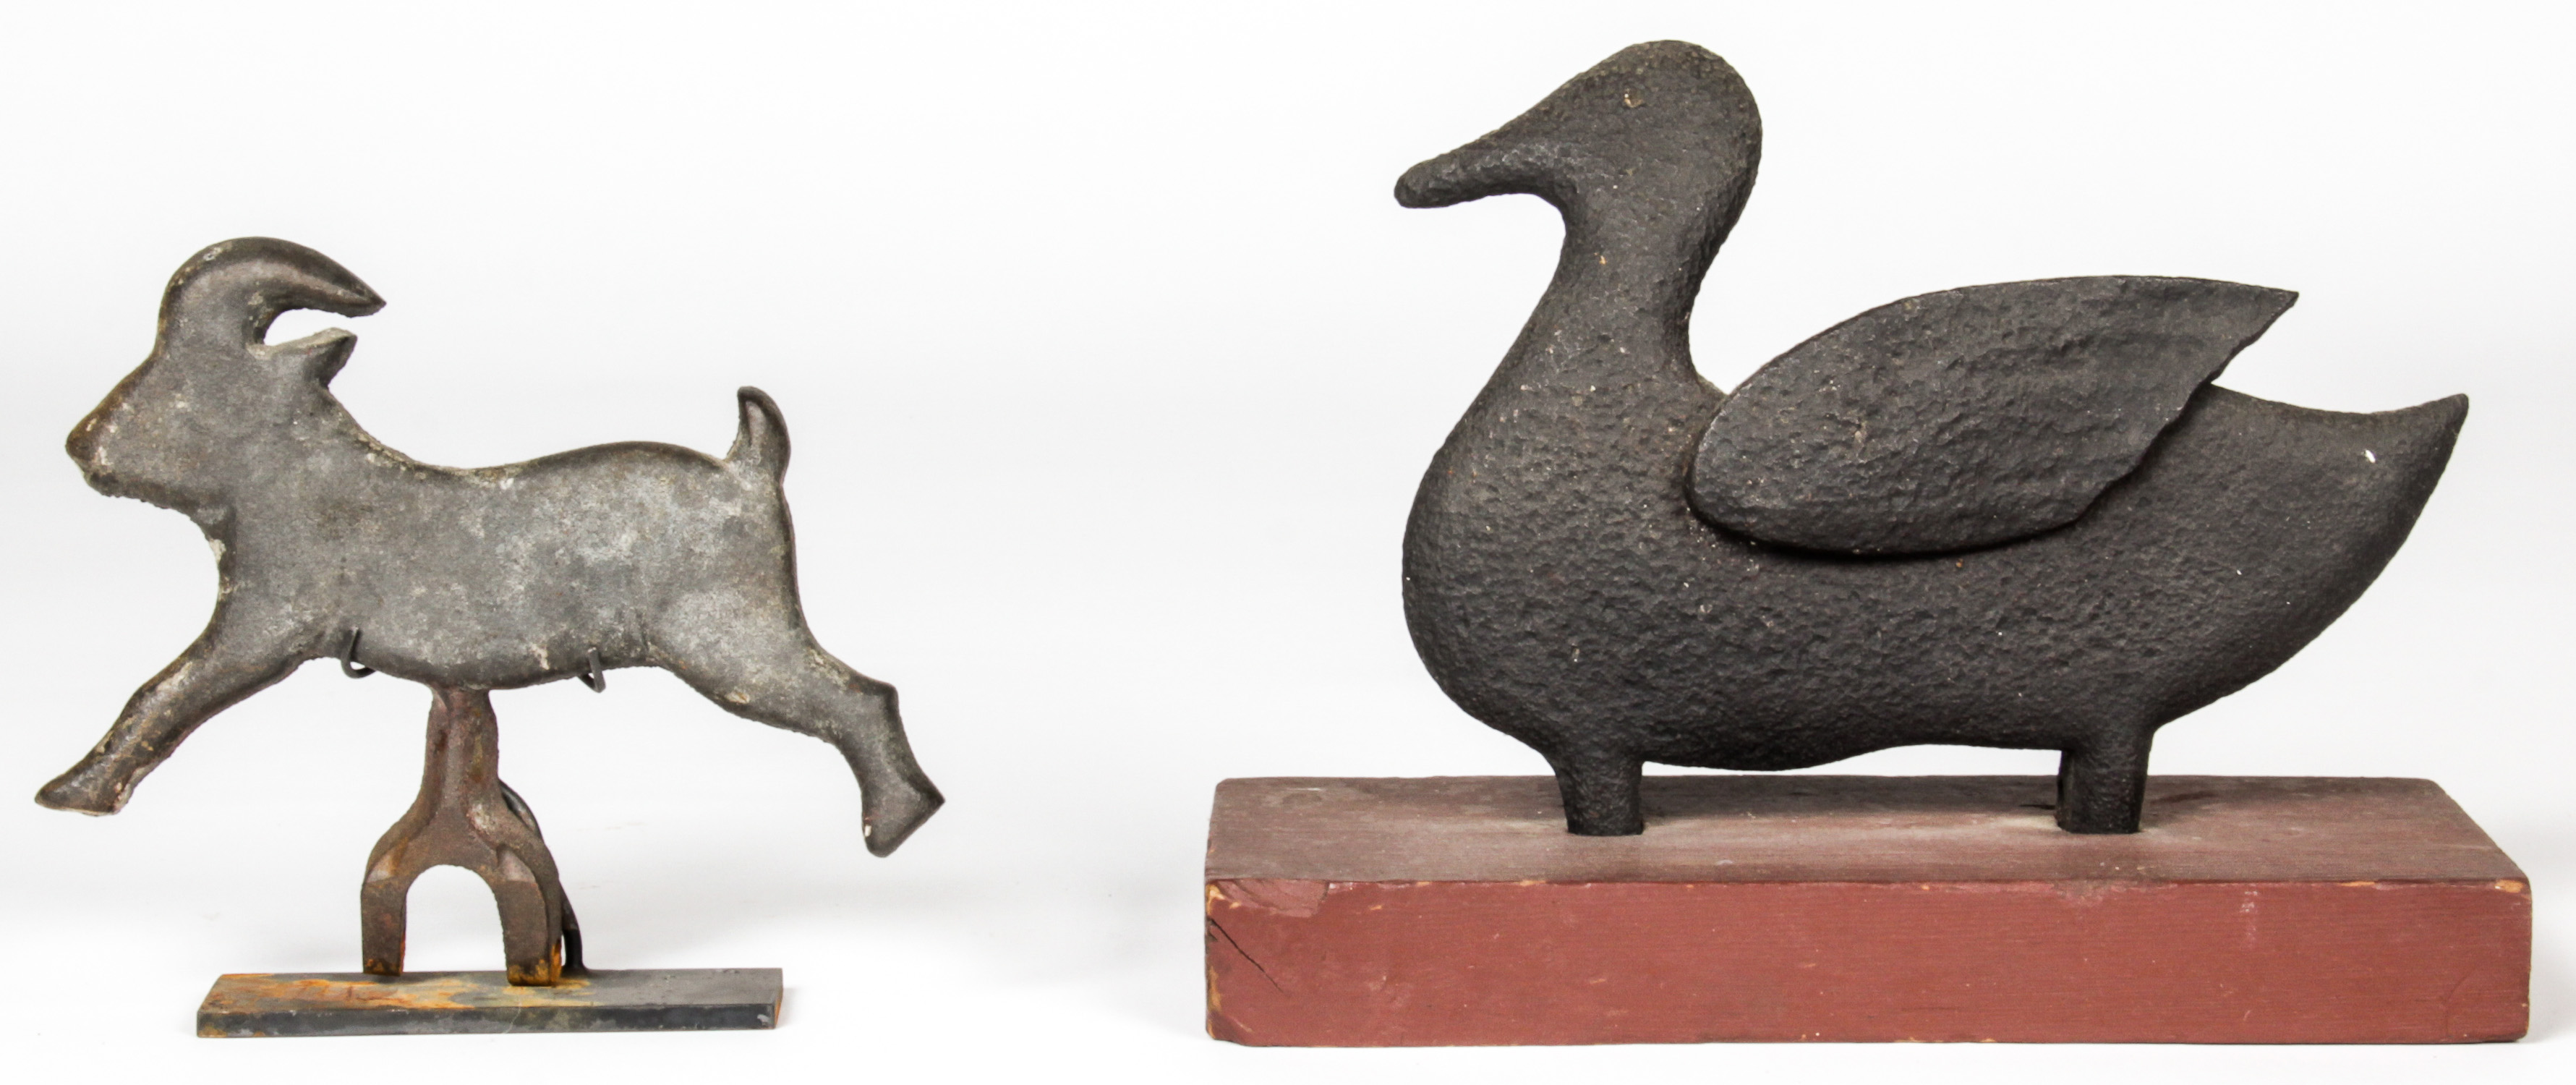 2 Vintage Cast Iron Carnival Knockdown Targets. One a duck form the other a goat. Size: 9" x 12" x